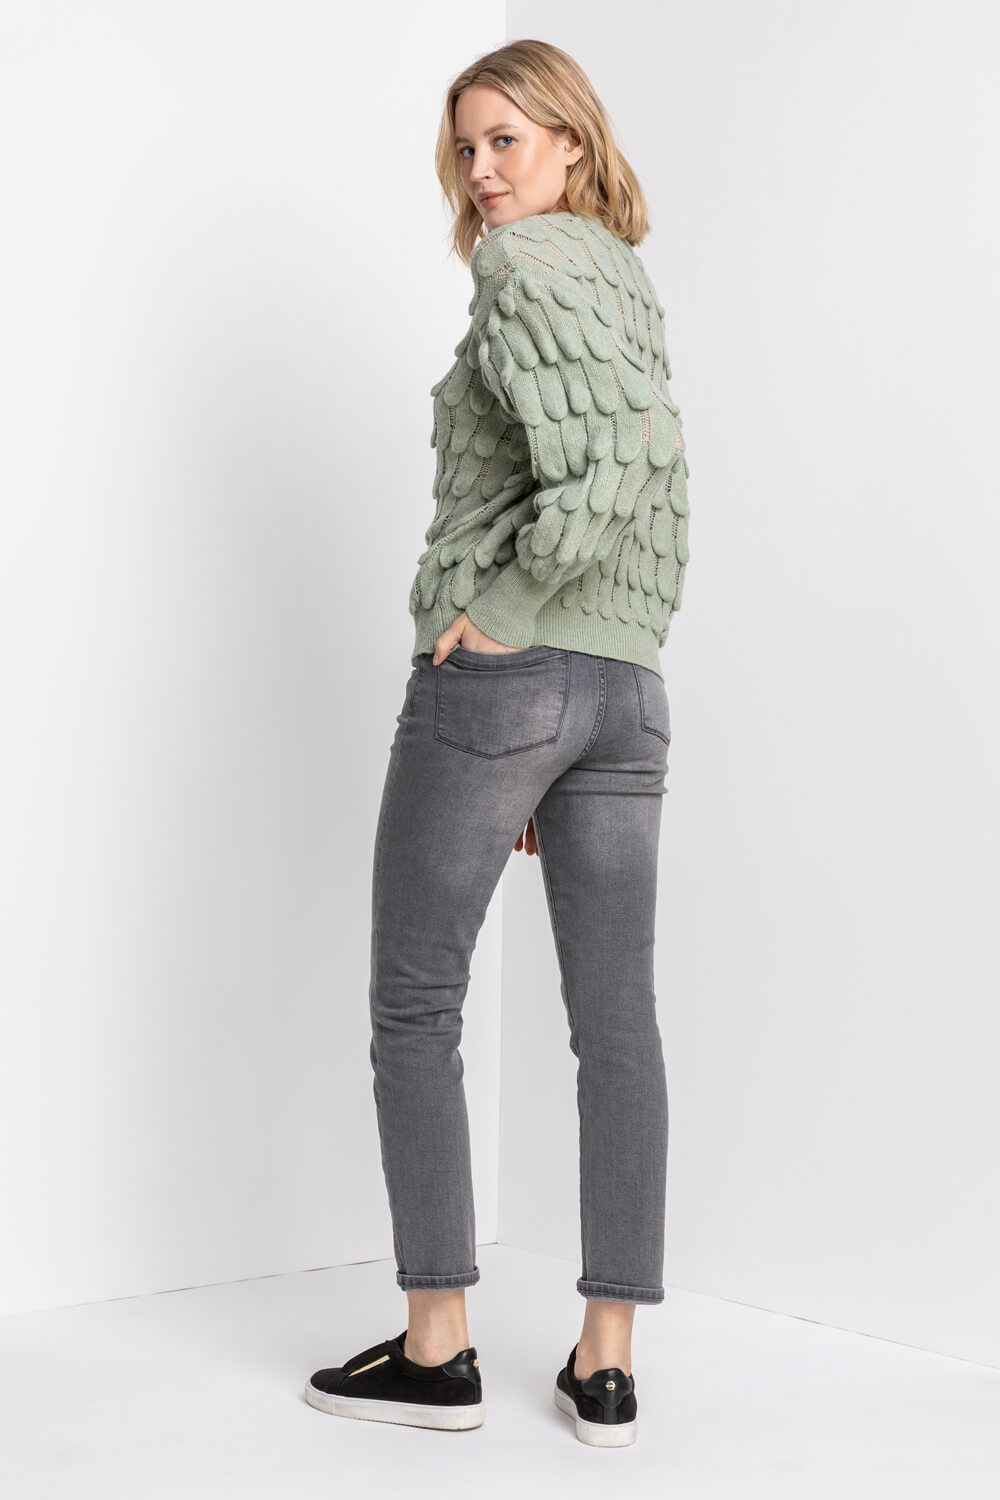 Sage Scallop Textured Knit Jumper, Image 2 of 5